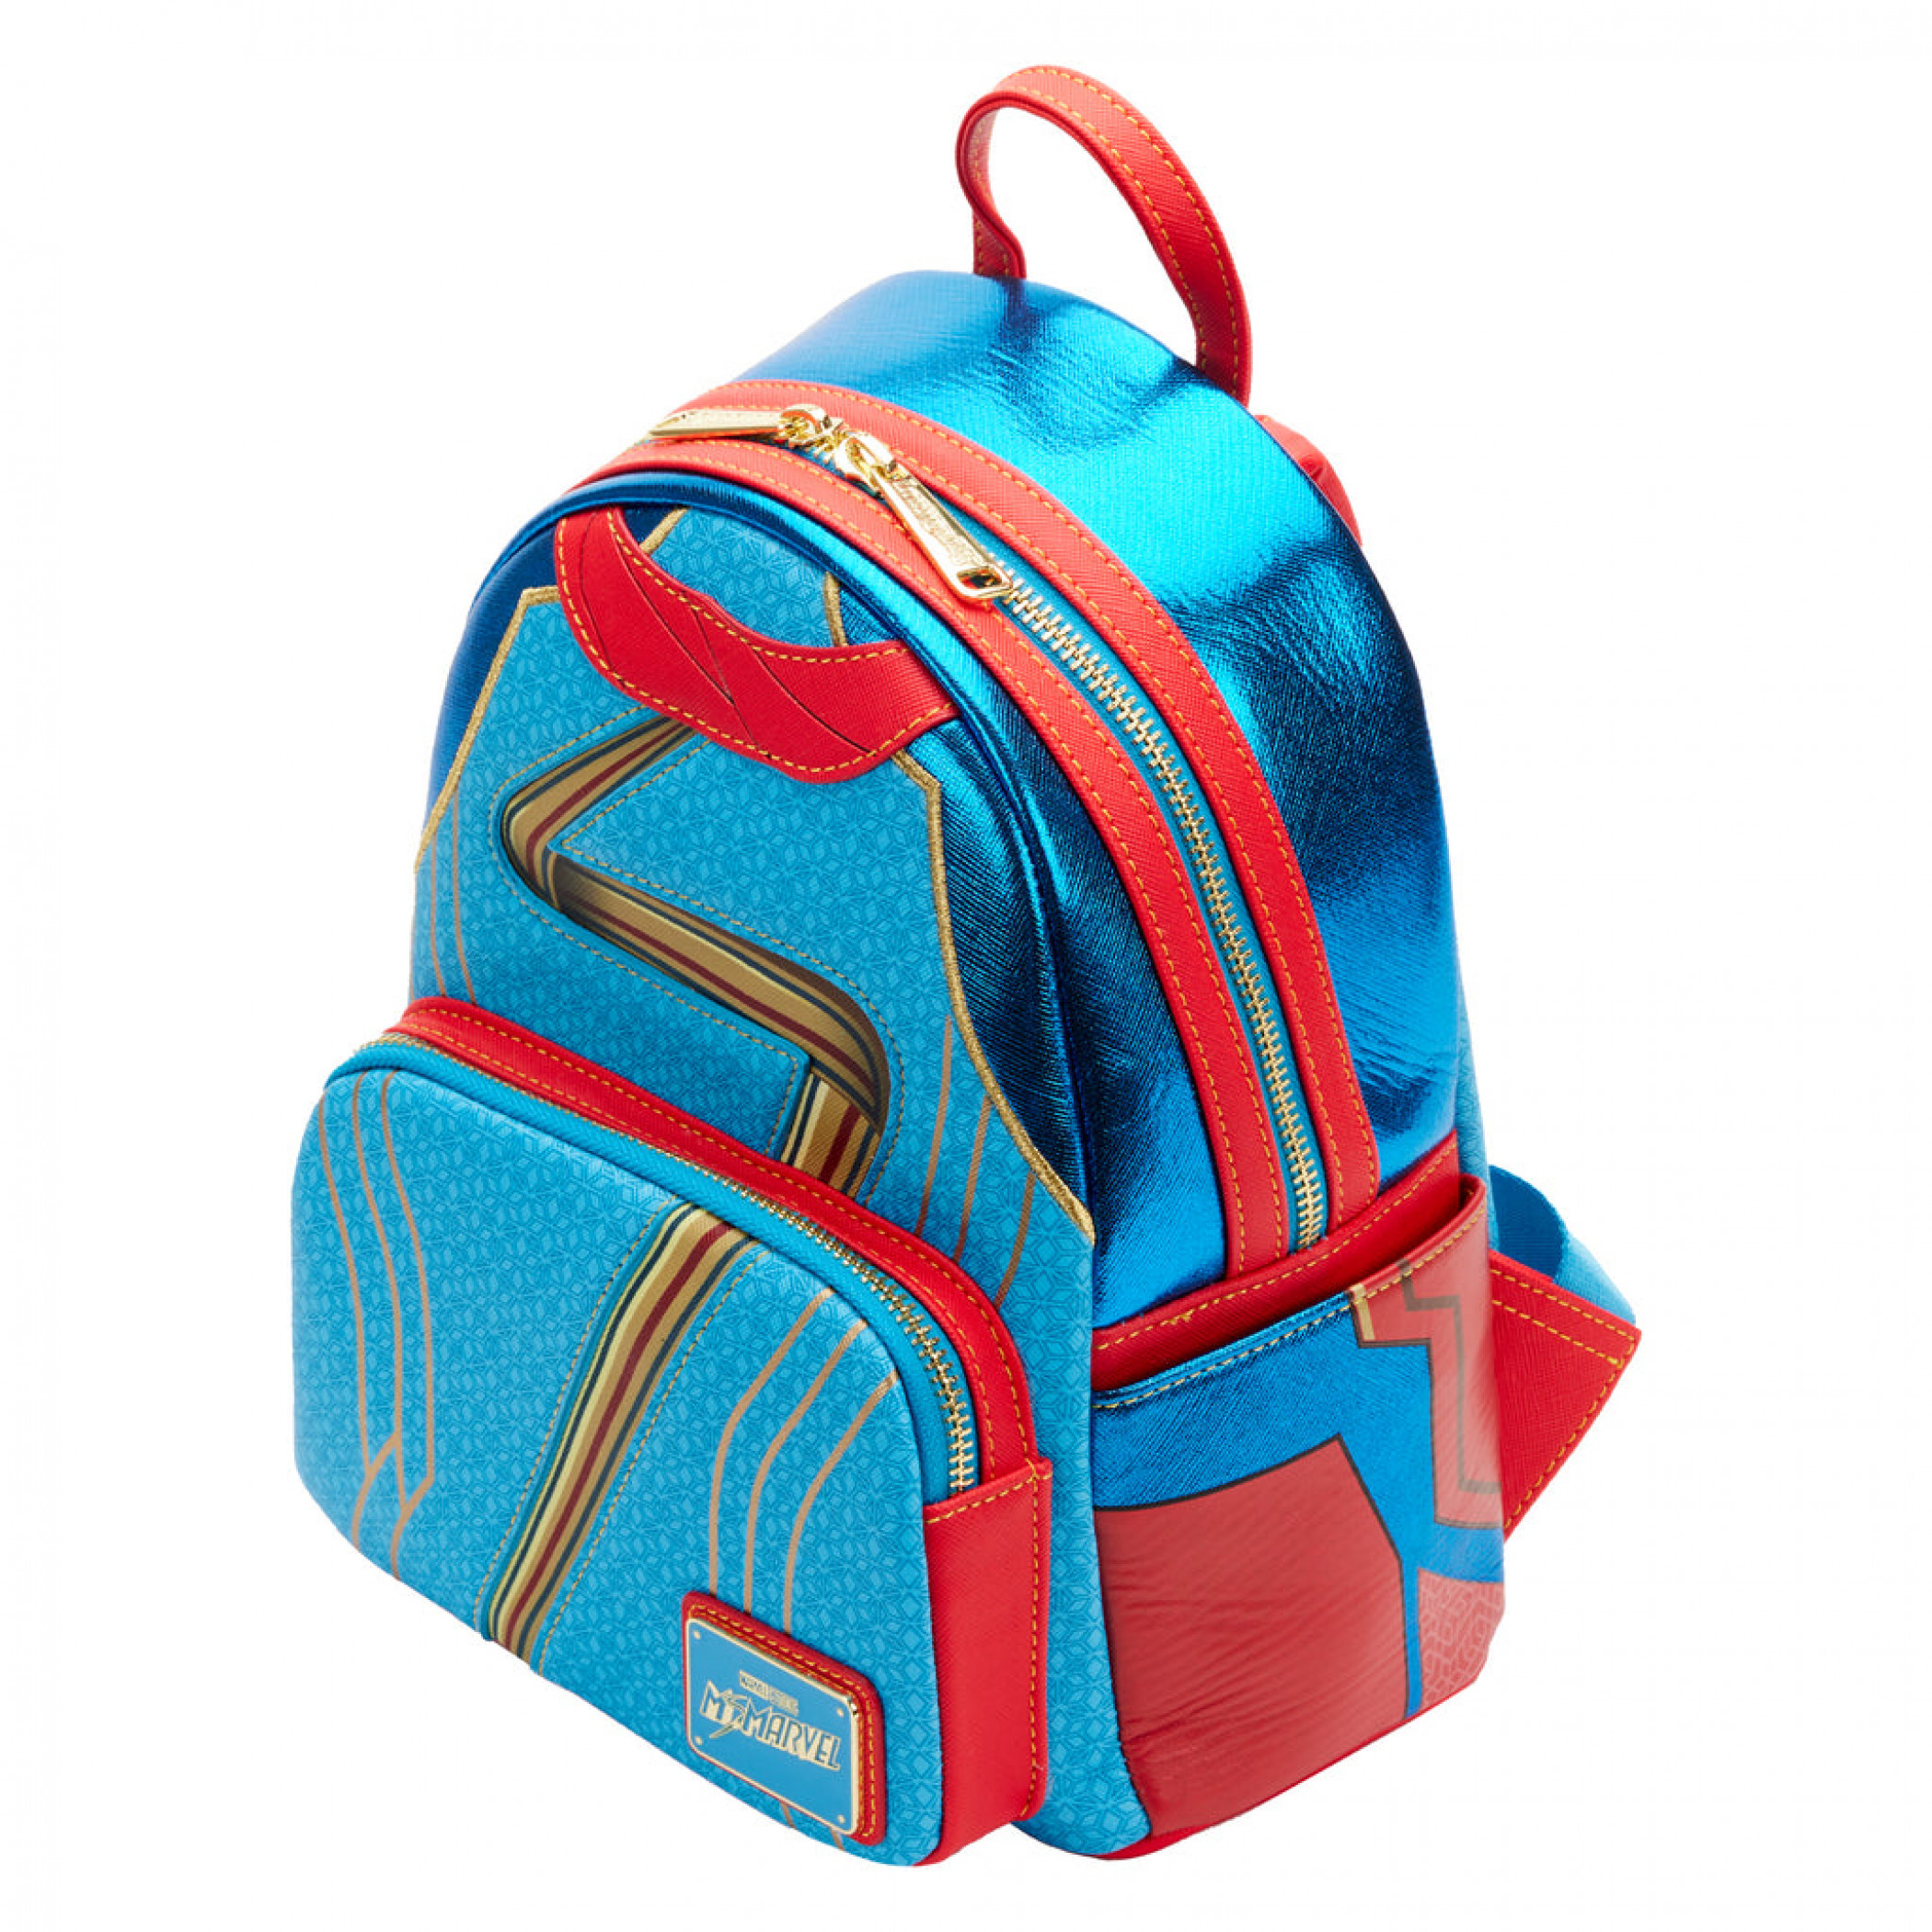 Ms. Marvel Cosplay Mini Backpack from Loungefly